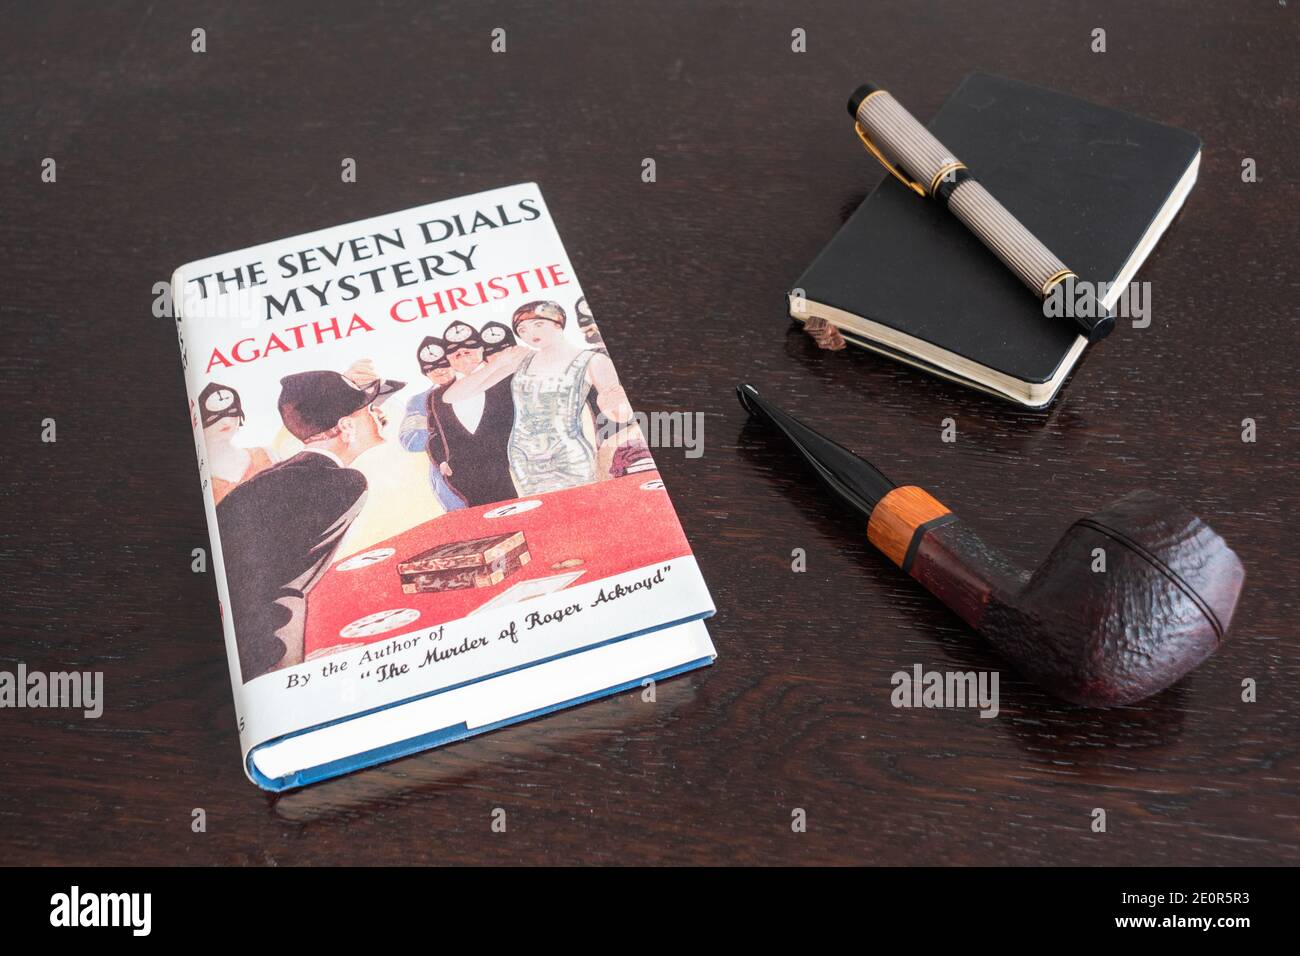 London, England, UK - January 2 2021: The Seven Dials Mystery Book by Agatha Christie in a Facsimile First Edition with Tobacco Pipe, Fountian Pen and Stock Photo